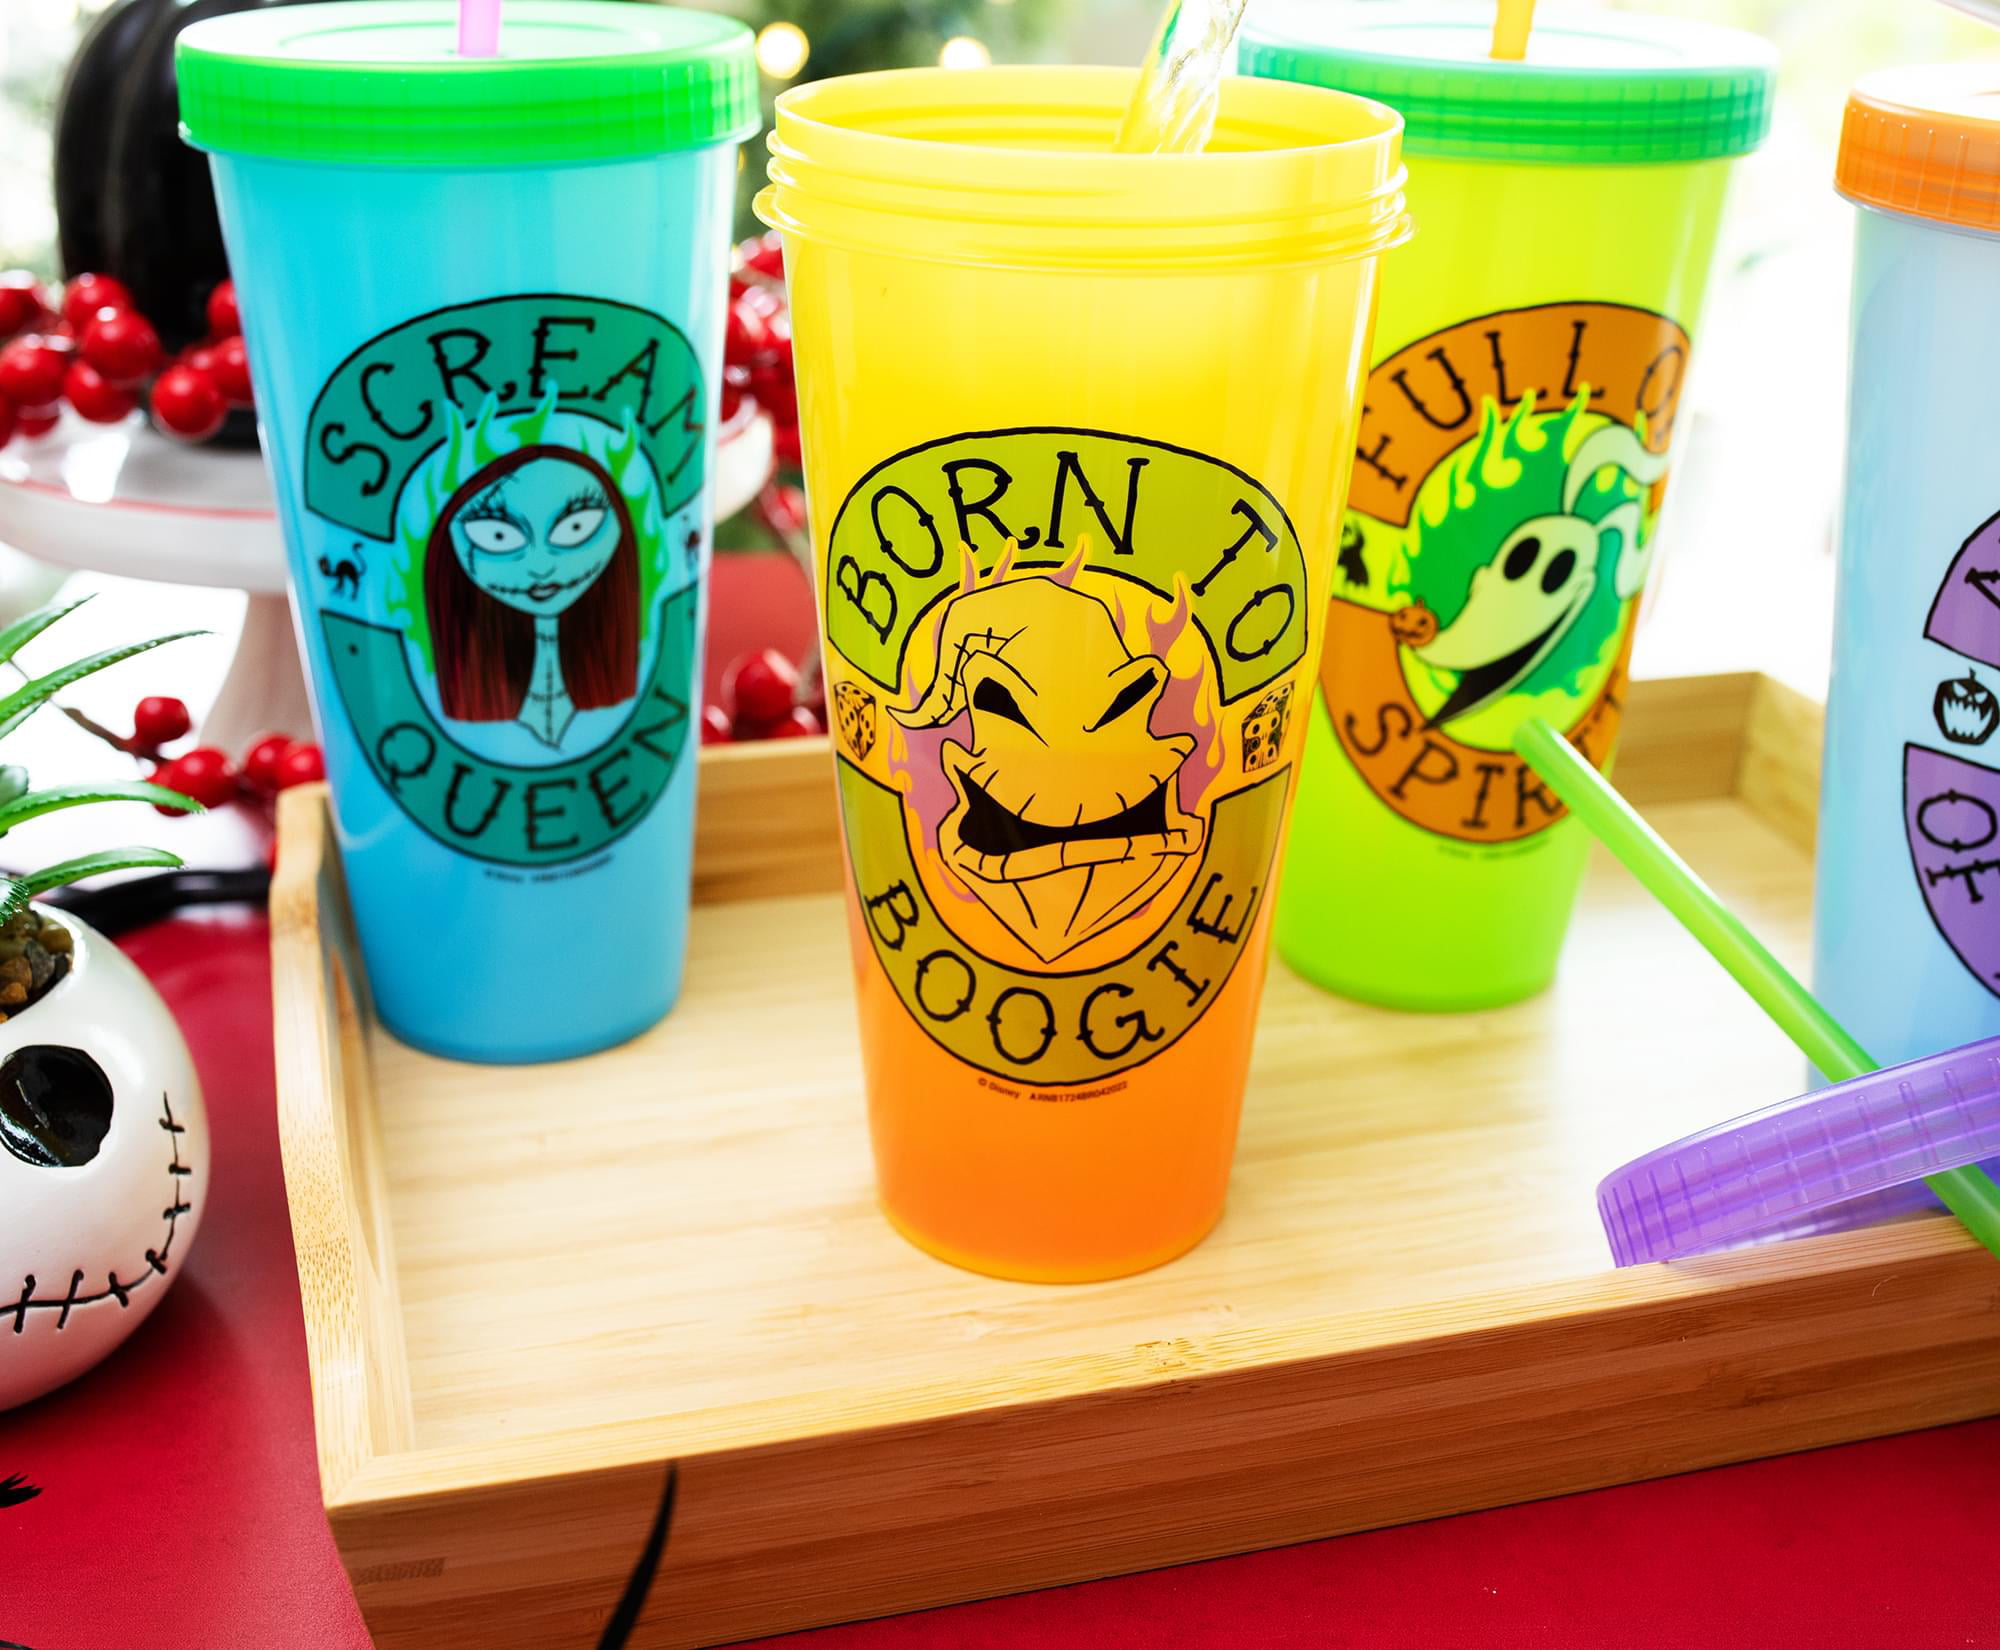 Disney Store Alice in Wonderland Acrylic Tumbler with Color Change Straw -   shop